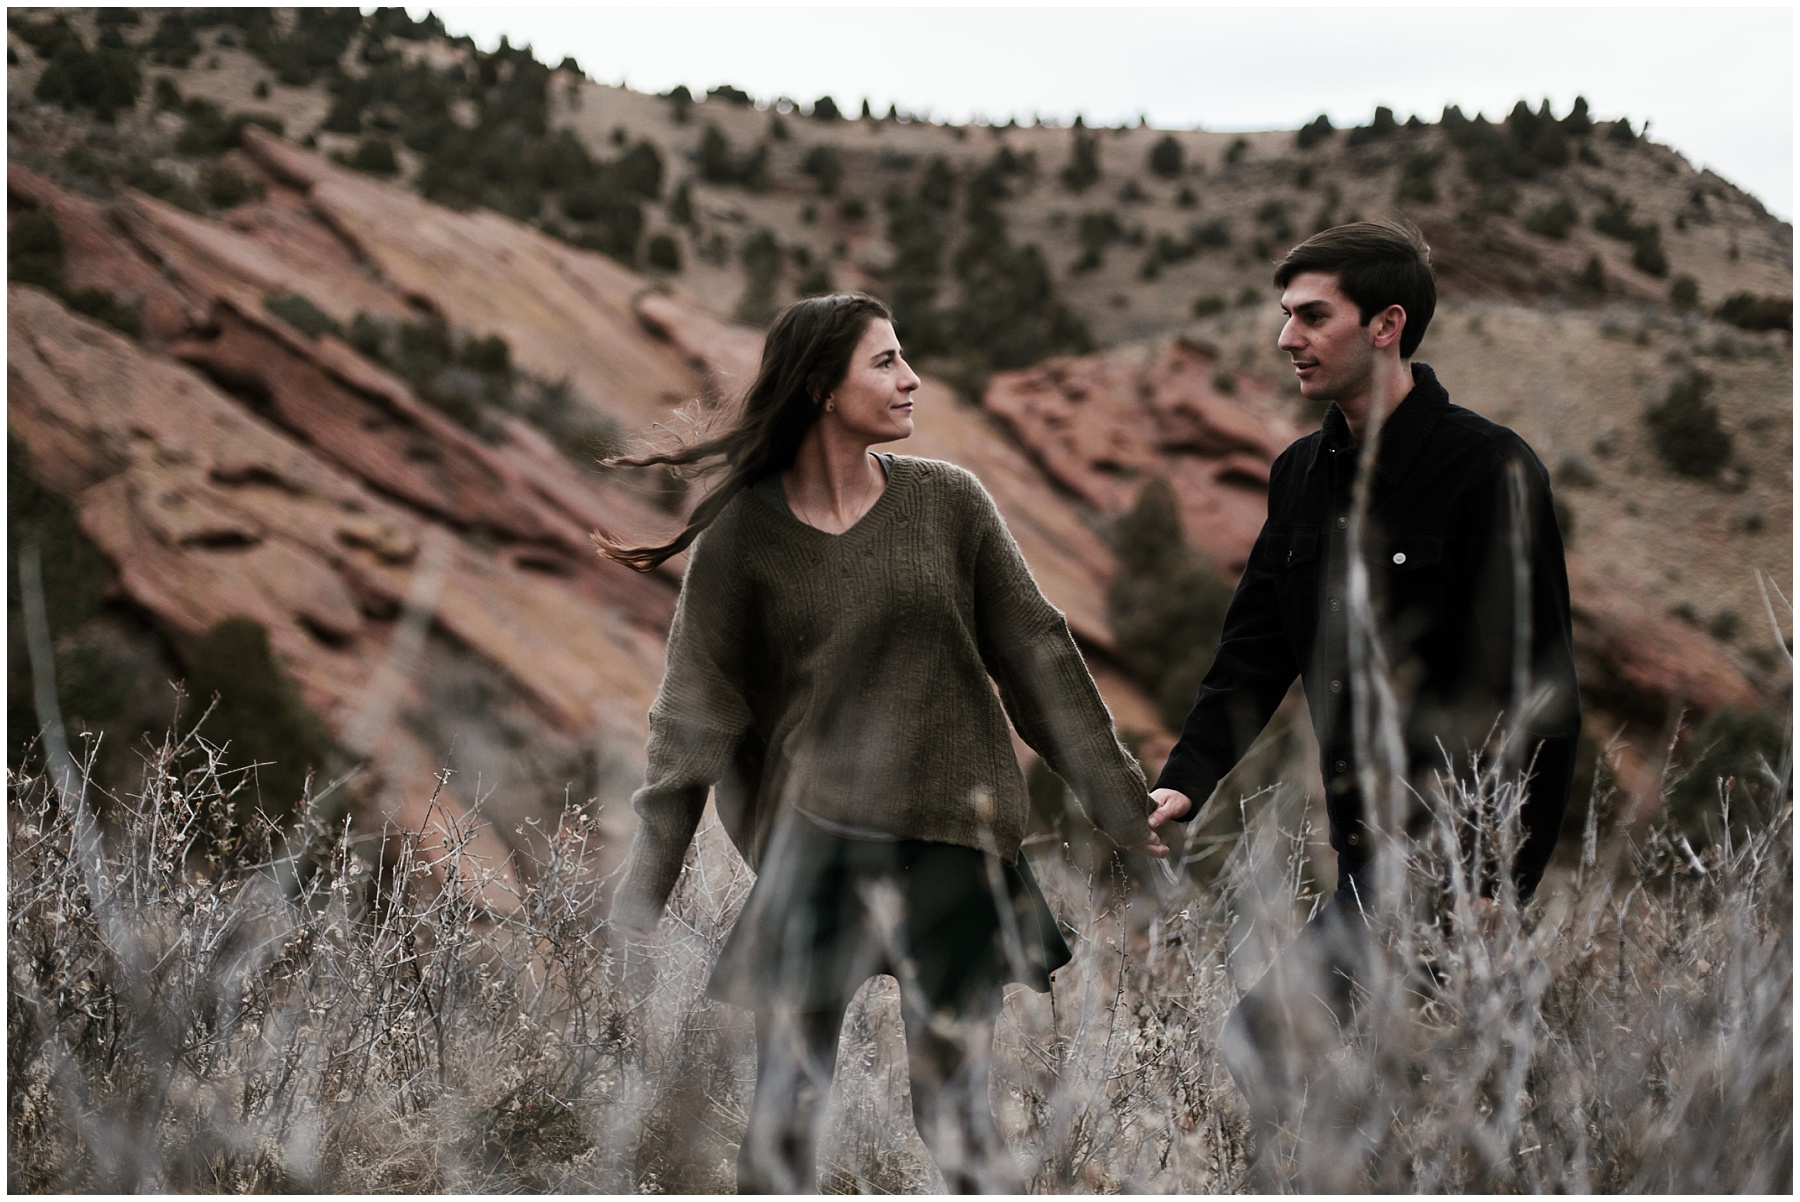 Katesalleyphotography-173_engagement shoot at Red Rocks.jpg